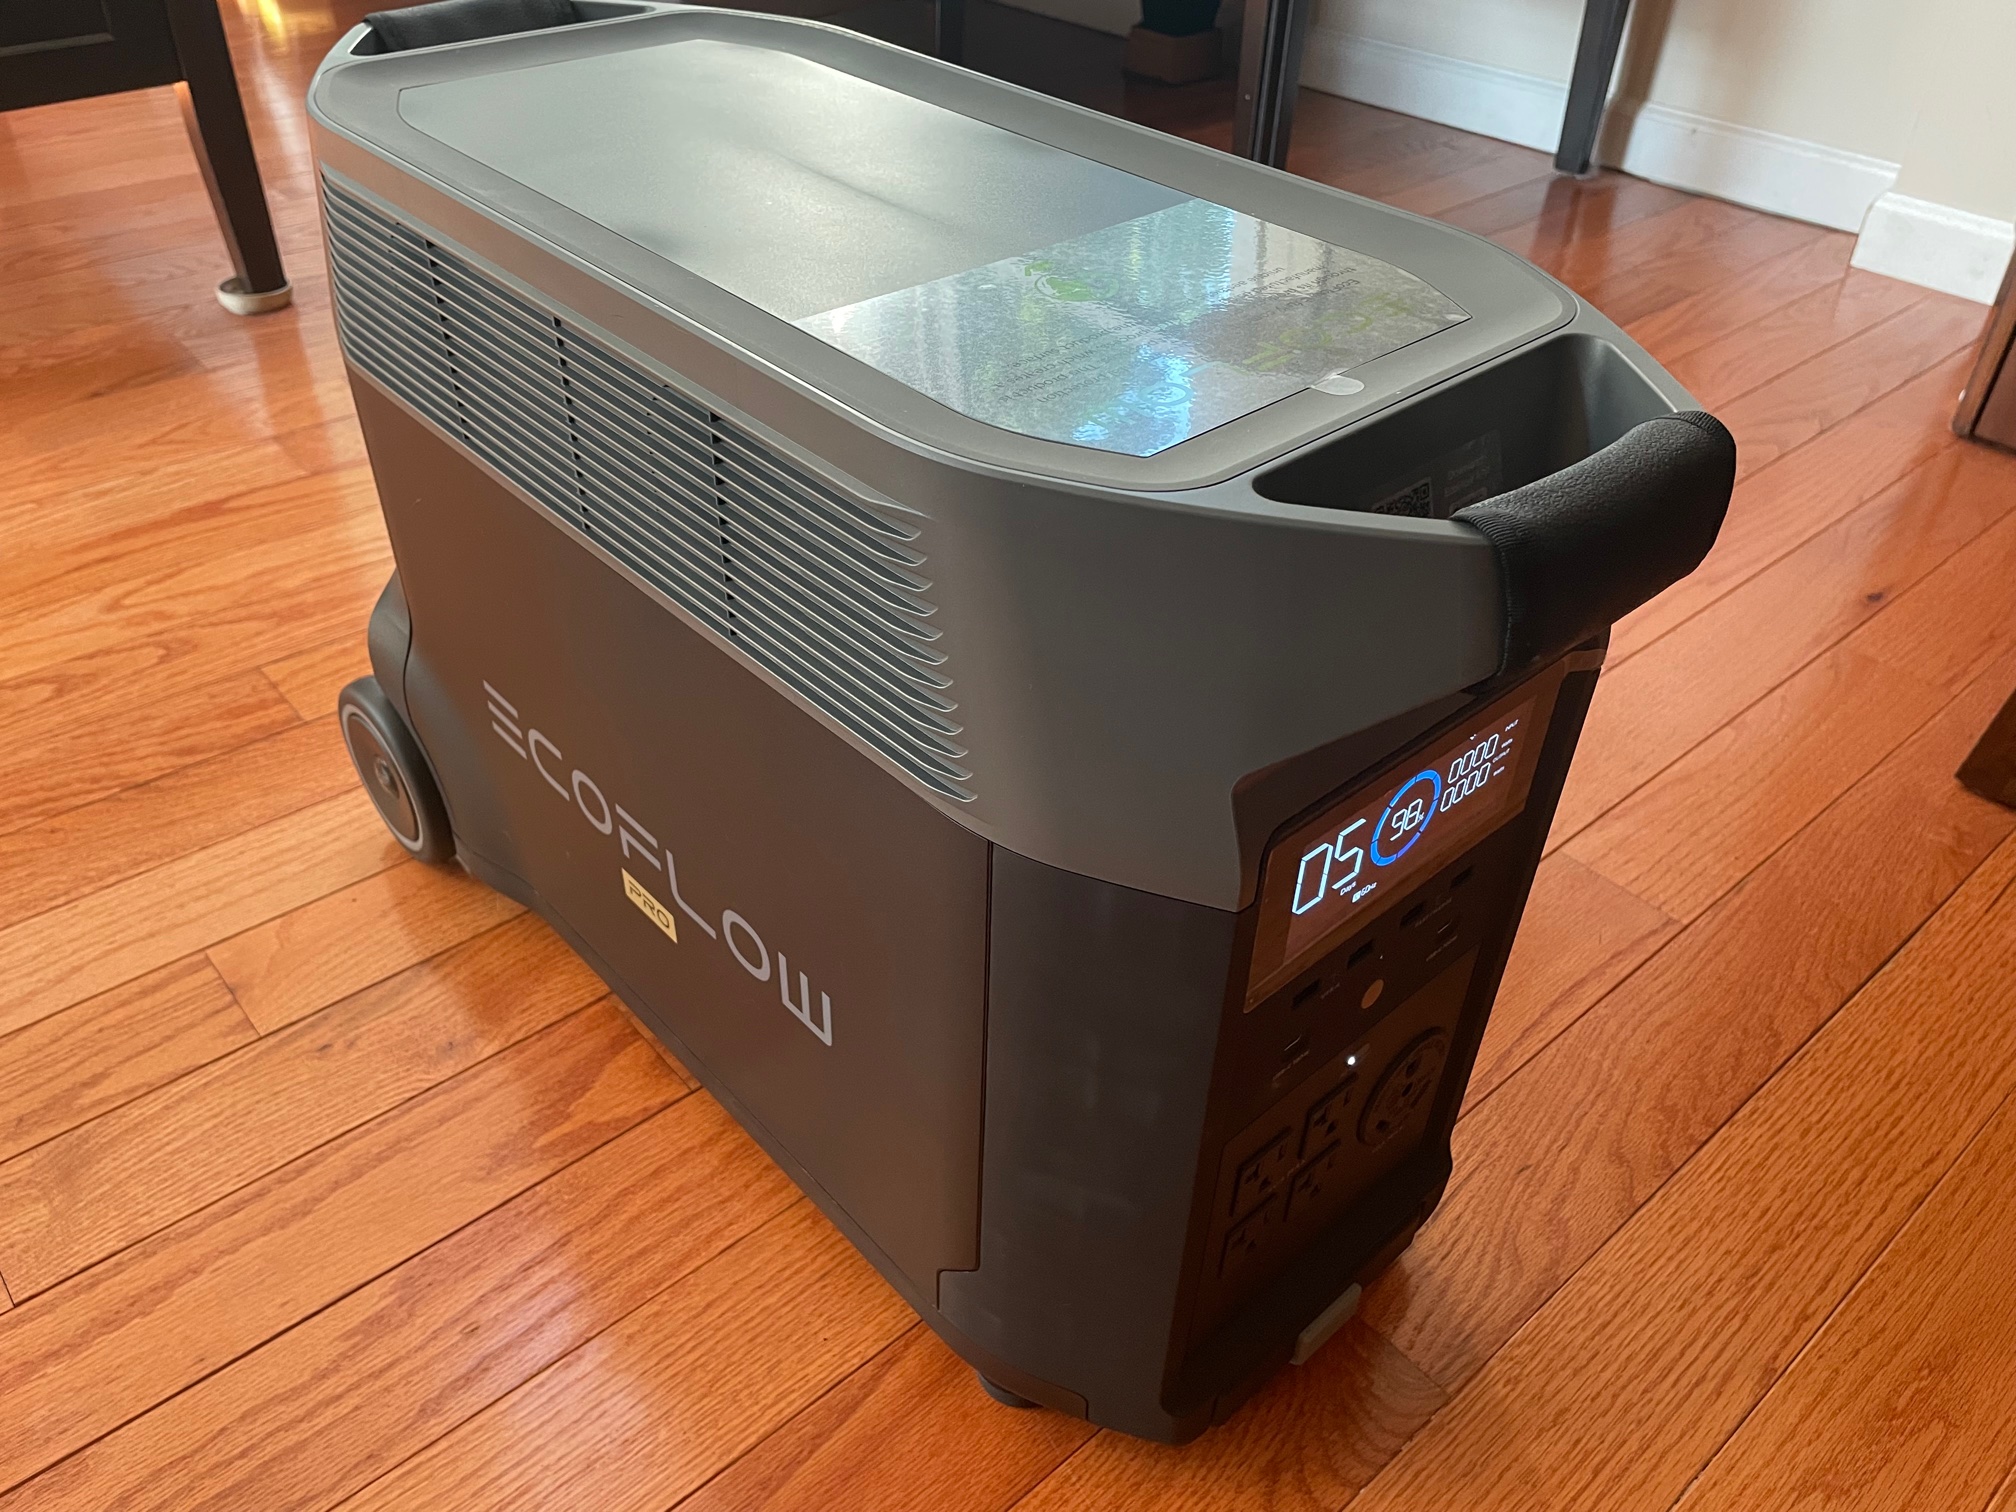 EcoFlow Delta Pro portable power station review - Better than a generator,  and no gas! - The Gadgeteer